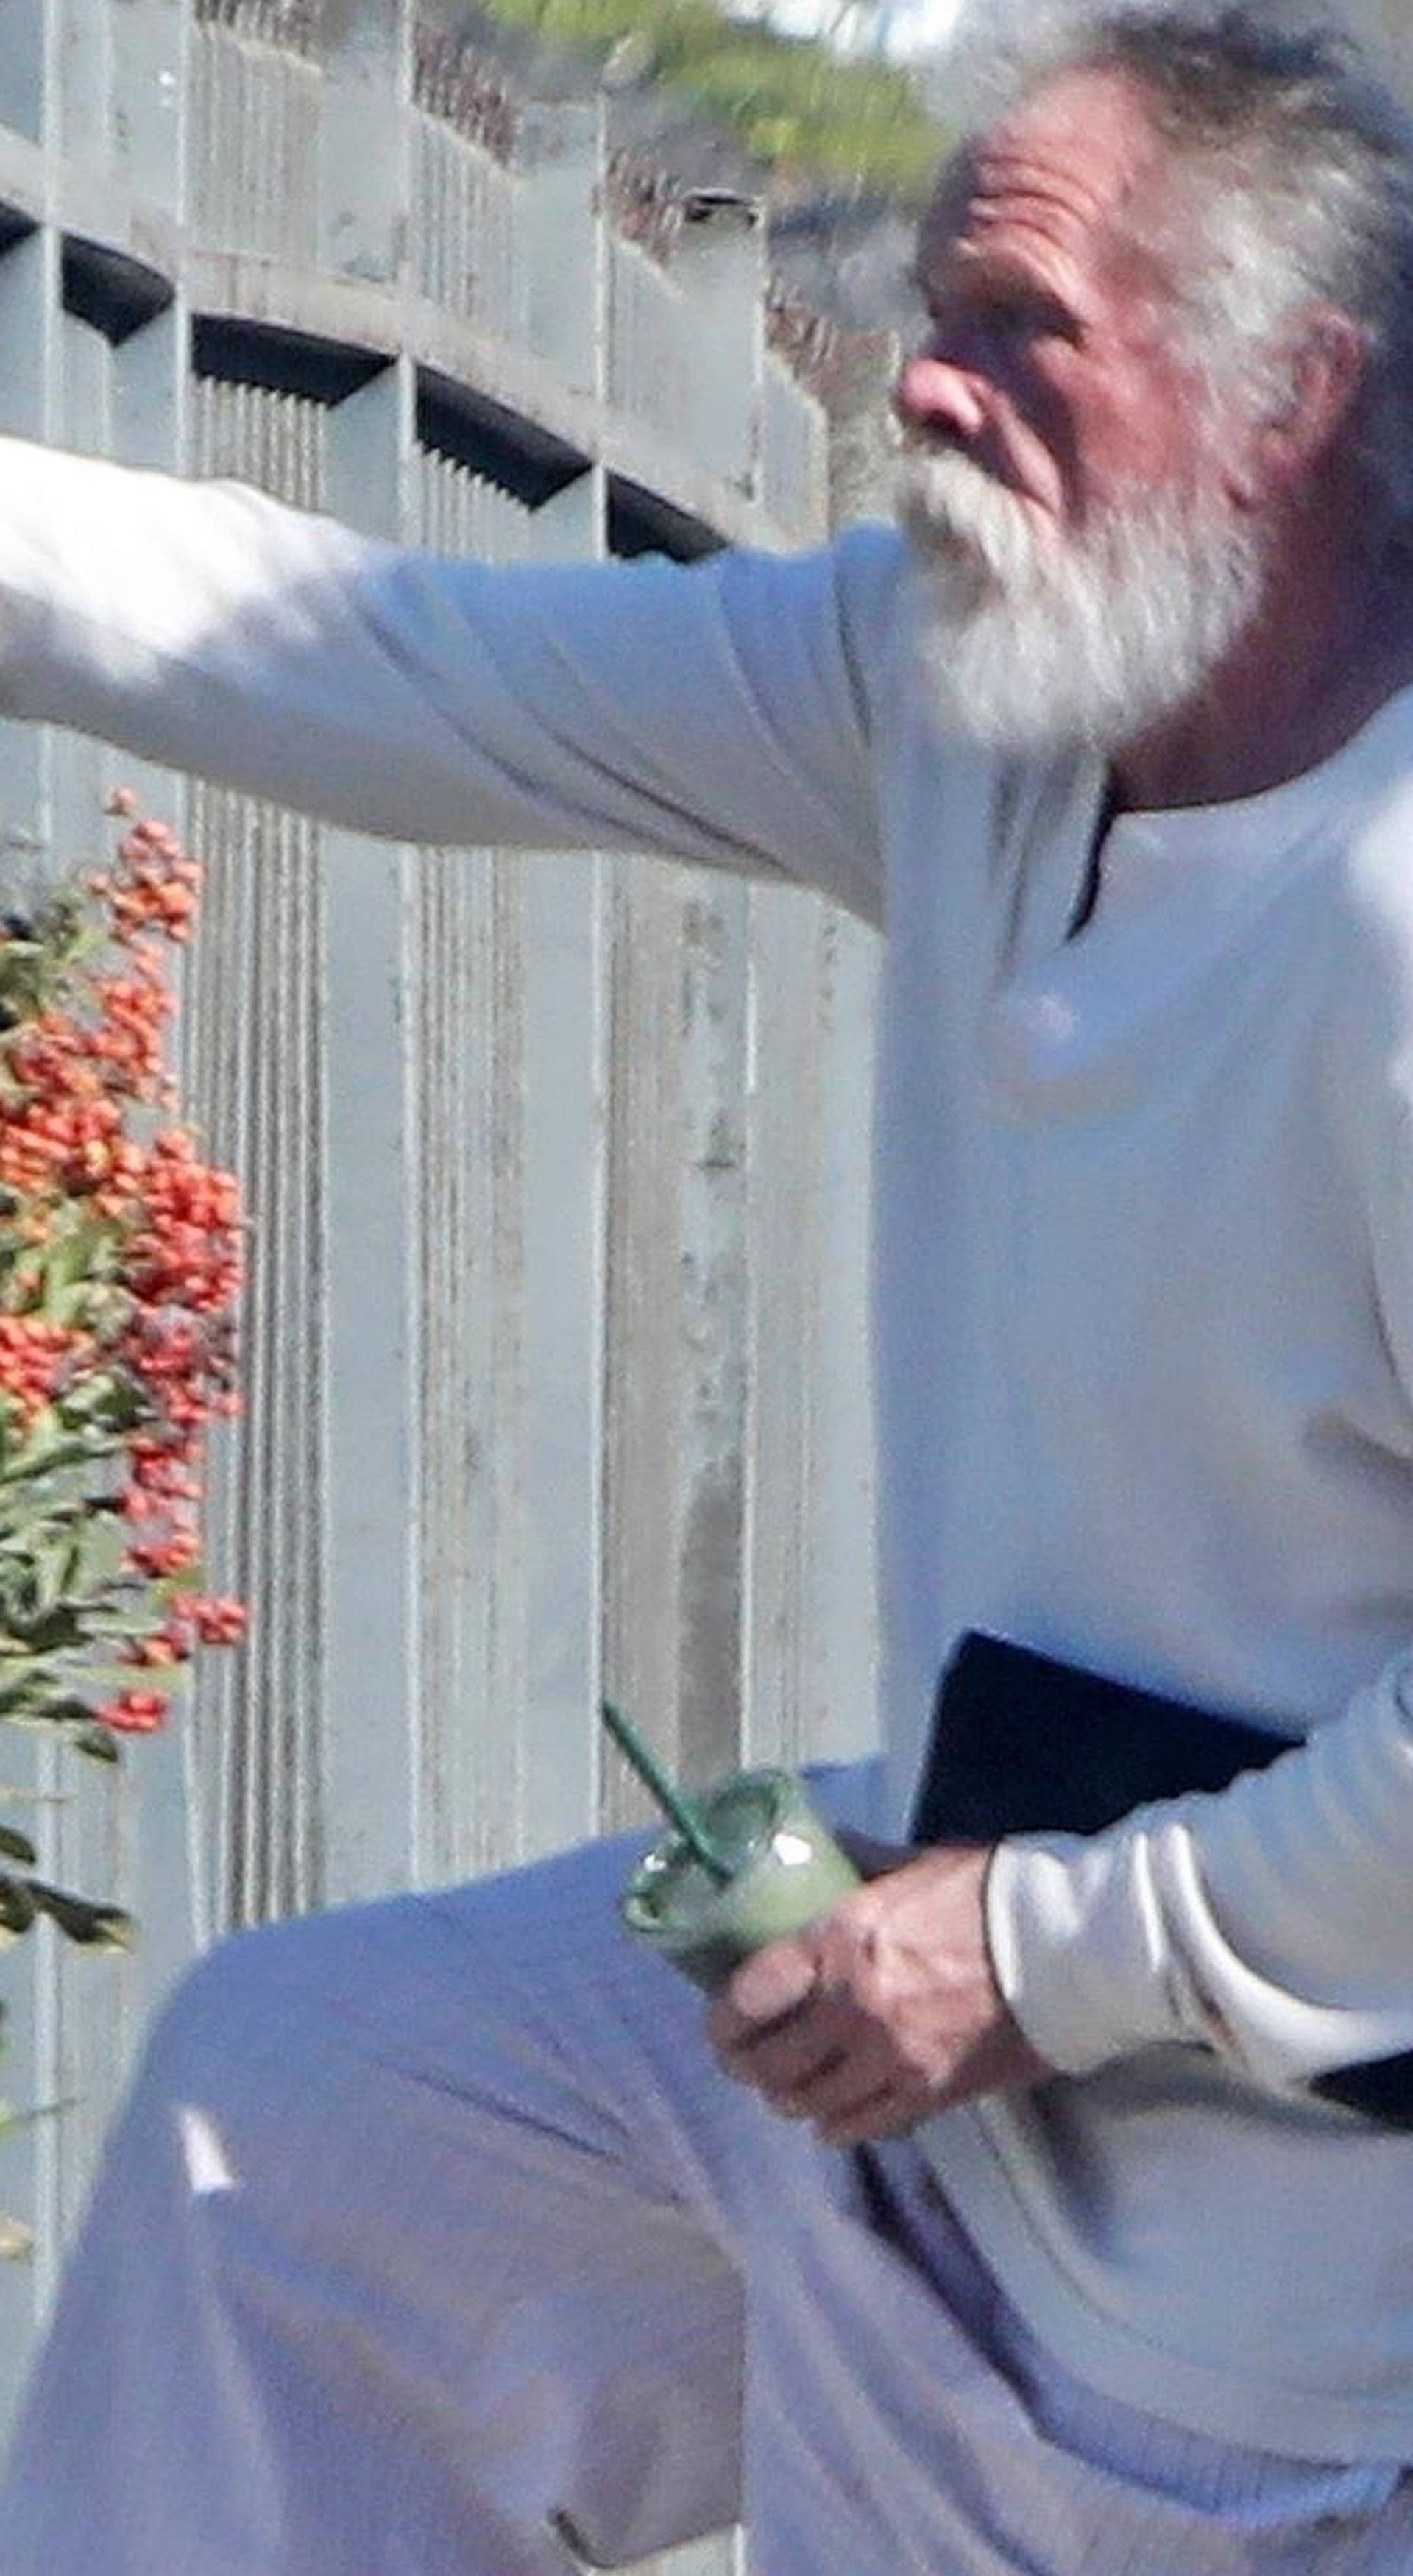 *EXCLUSIVE* Nick Nolte climbs a fence in his PJ's in Malibu